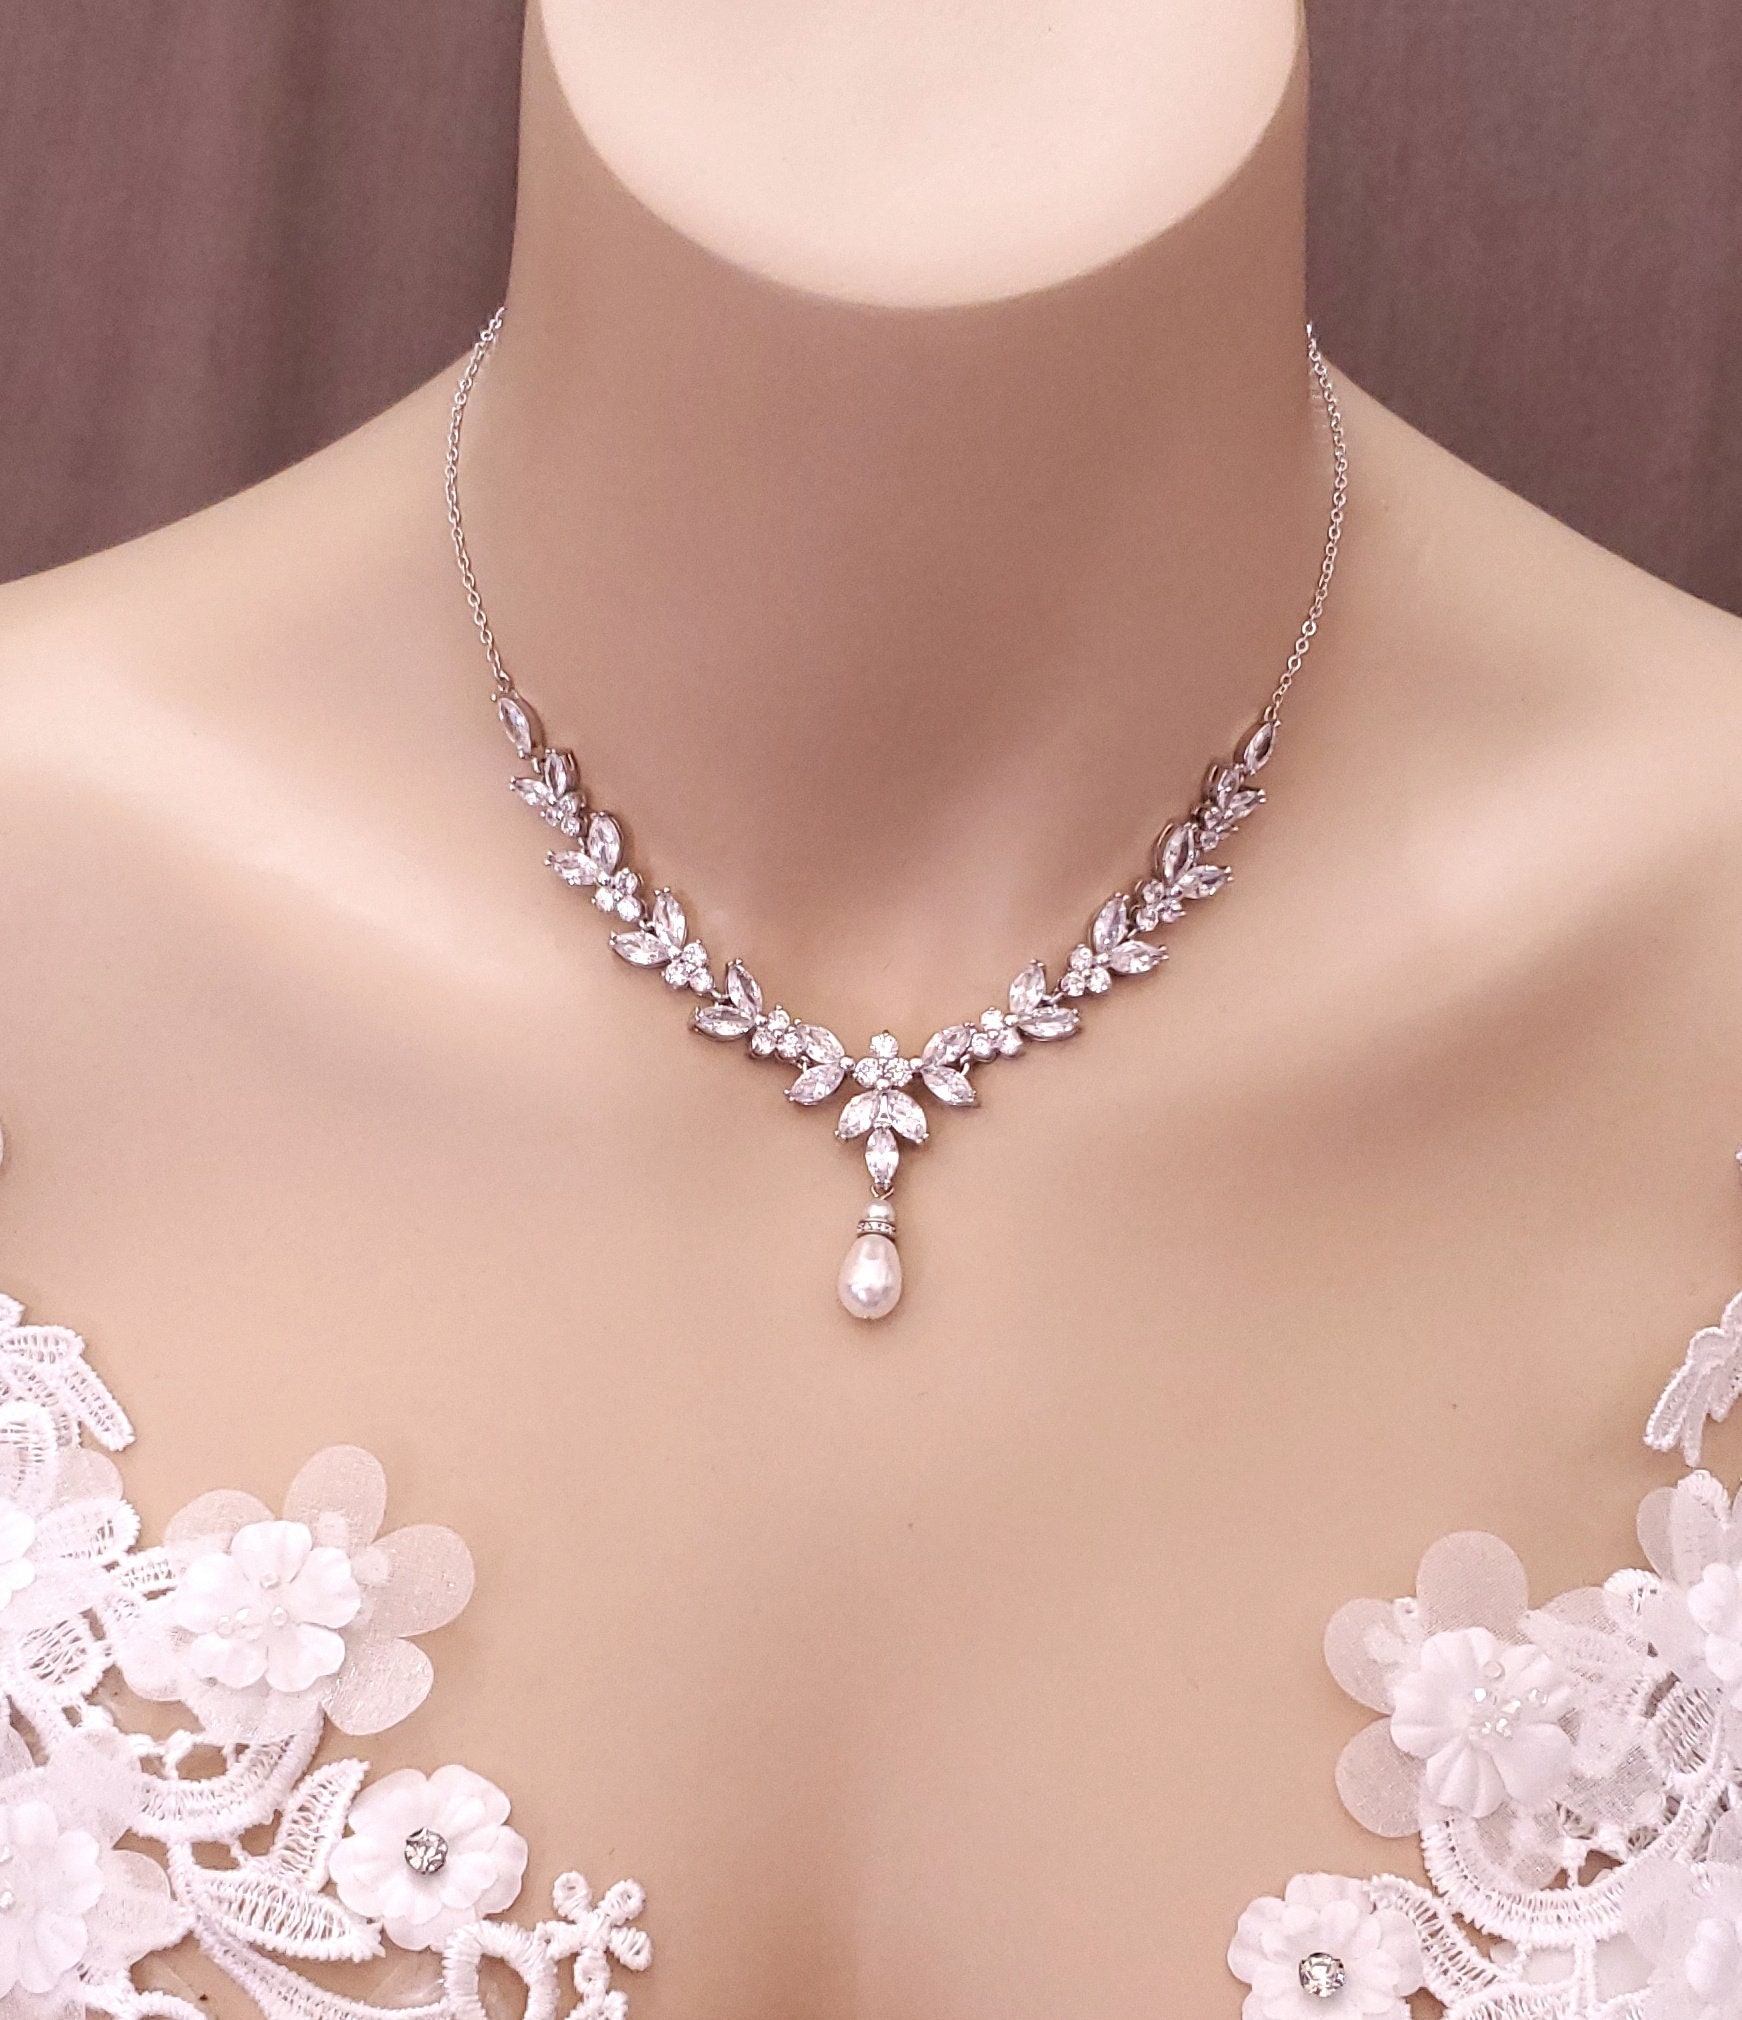 Bridal Jewelry Wedding Pearl Necklace White or Cream Pear Crystal